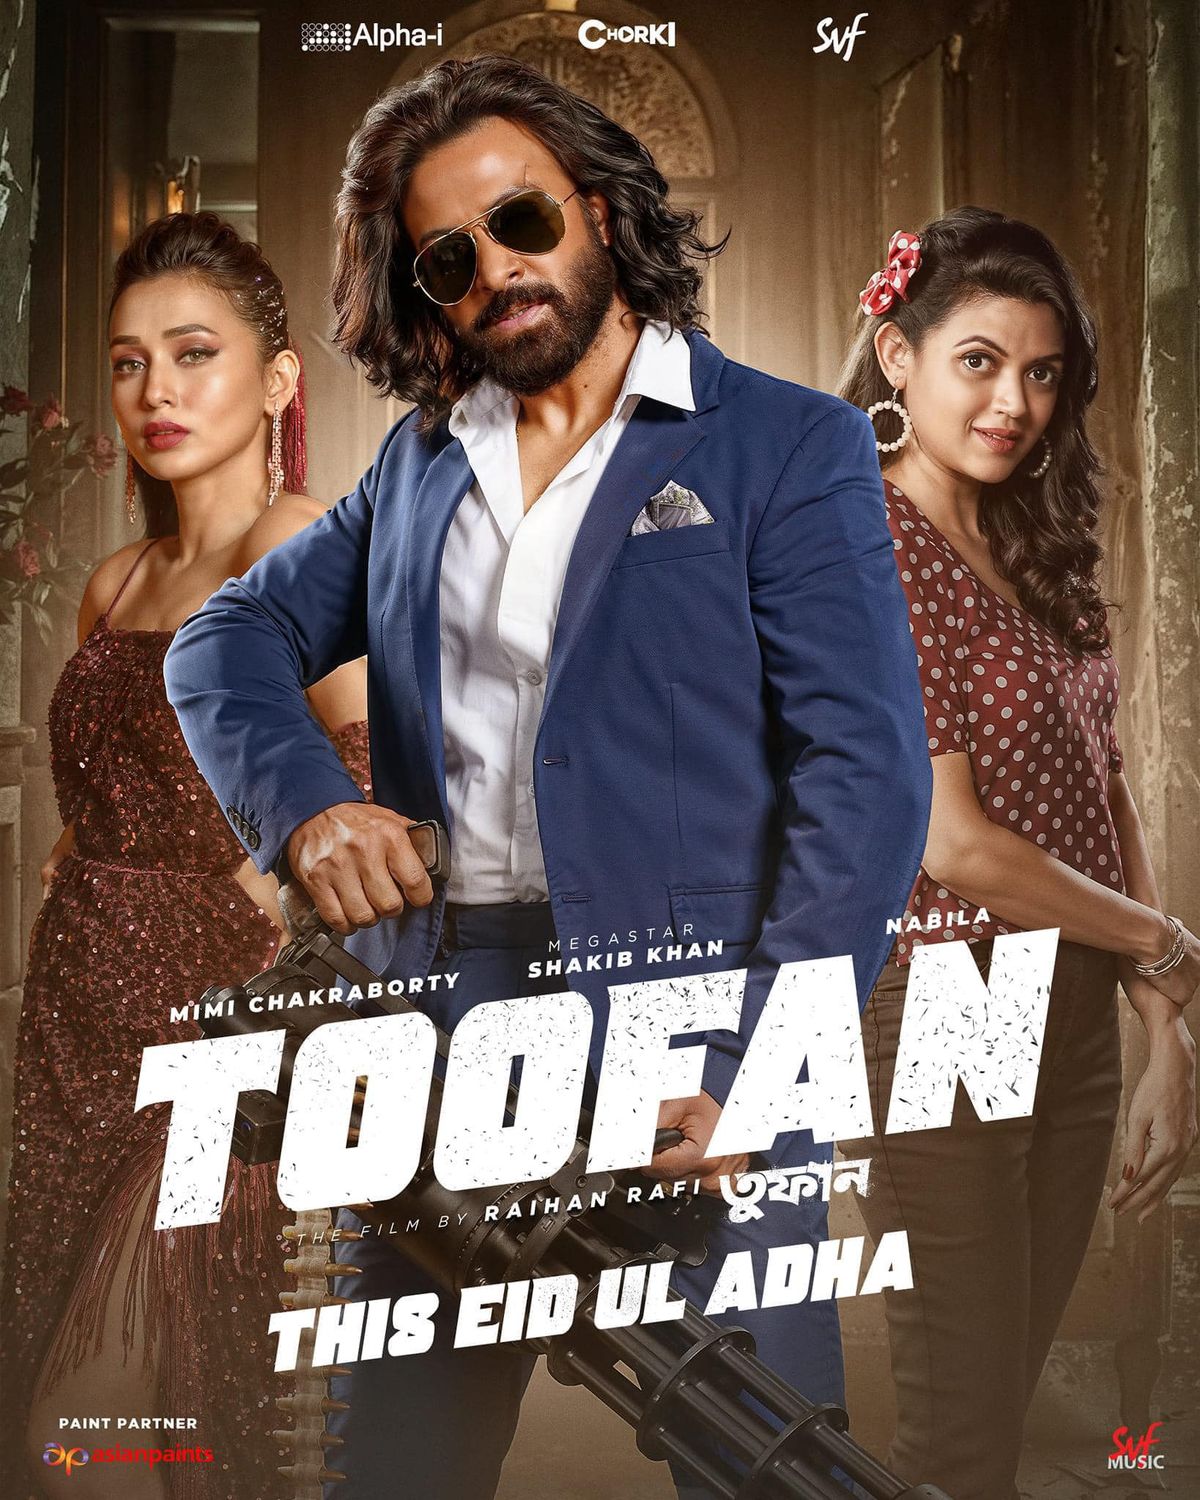 Toofan at Hoyts Belconnen 14th July Sunday 6PM: 3rd show